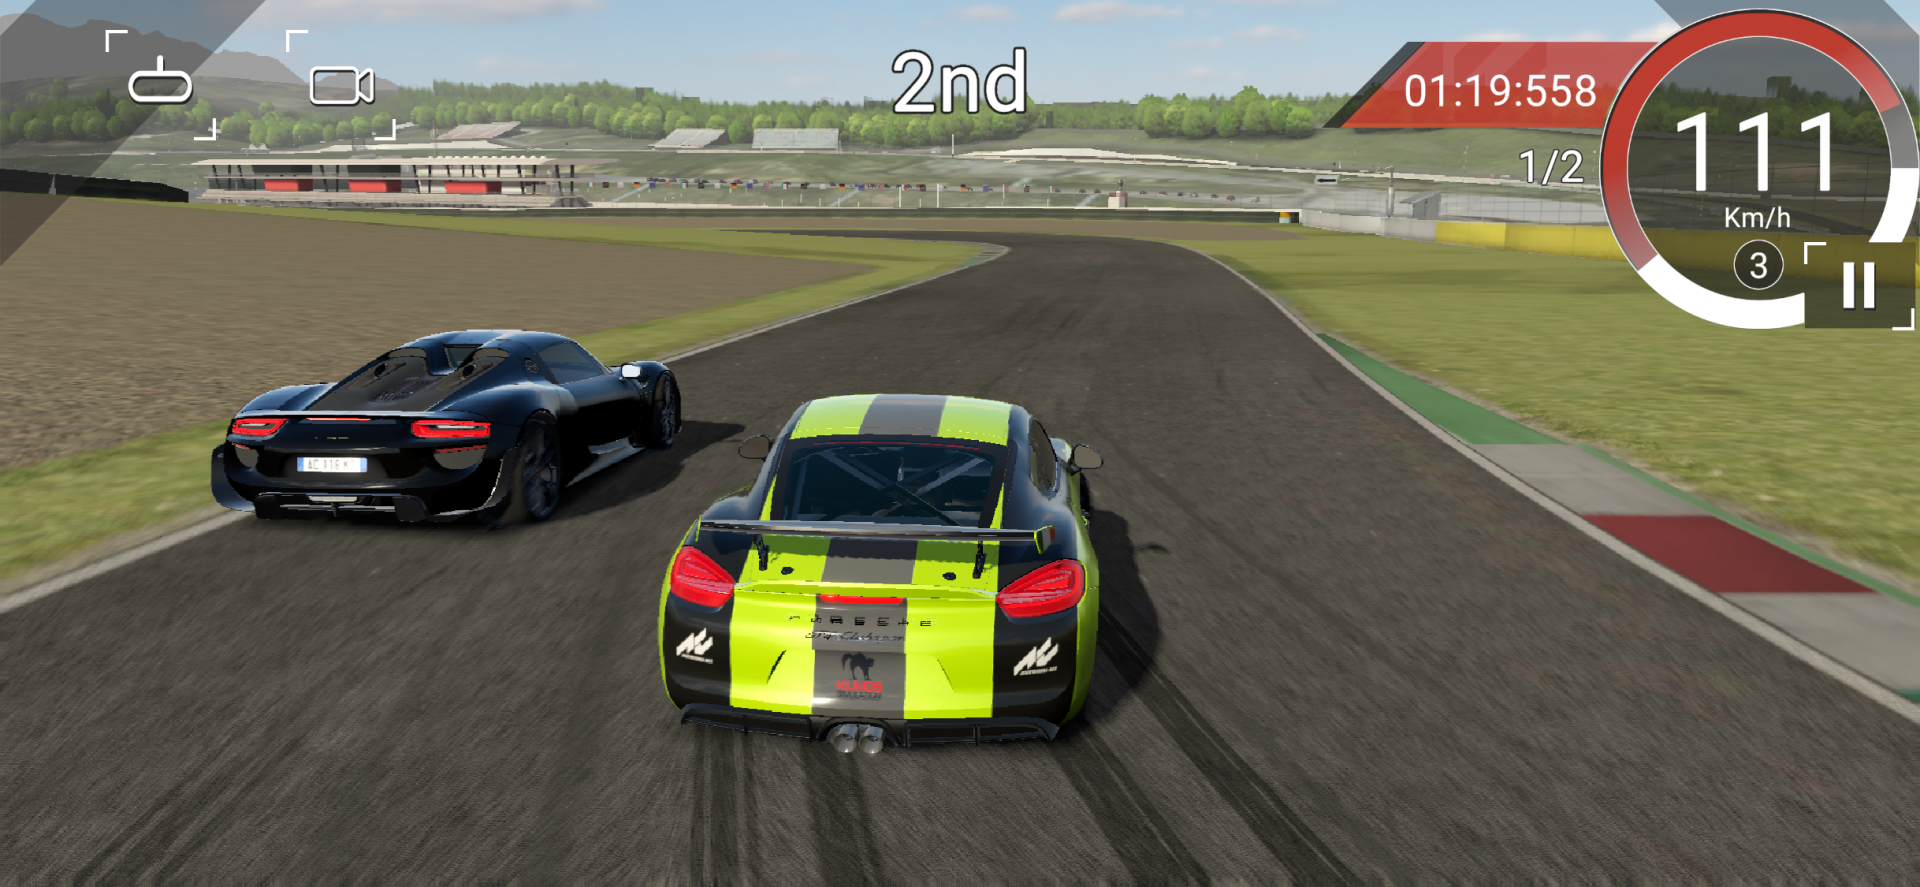 Assetto Corsa Mobile Images Screenshots Gamegrin